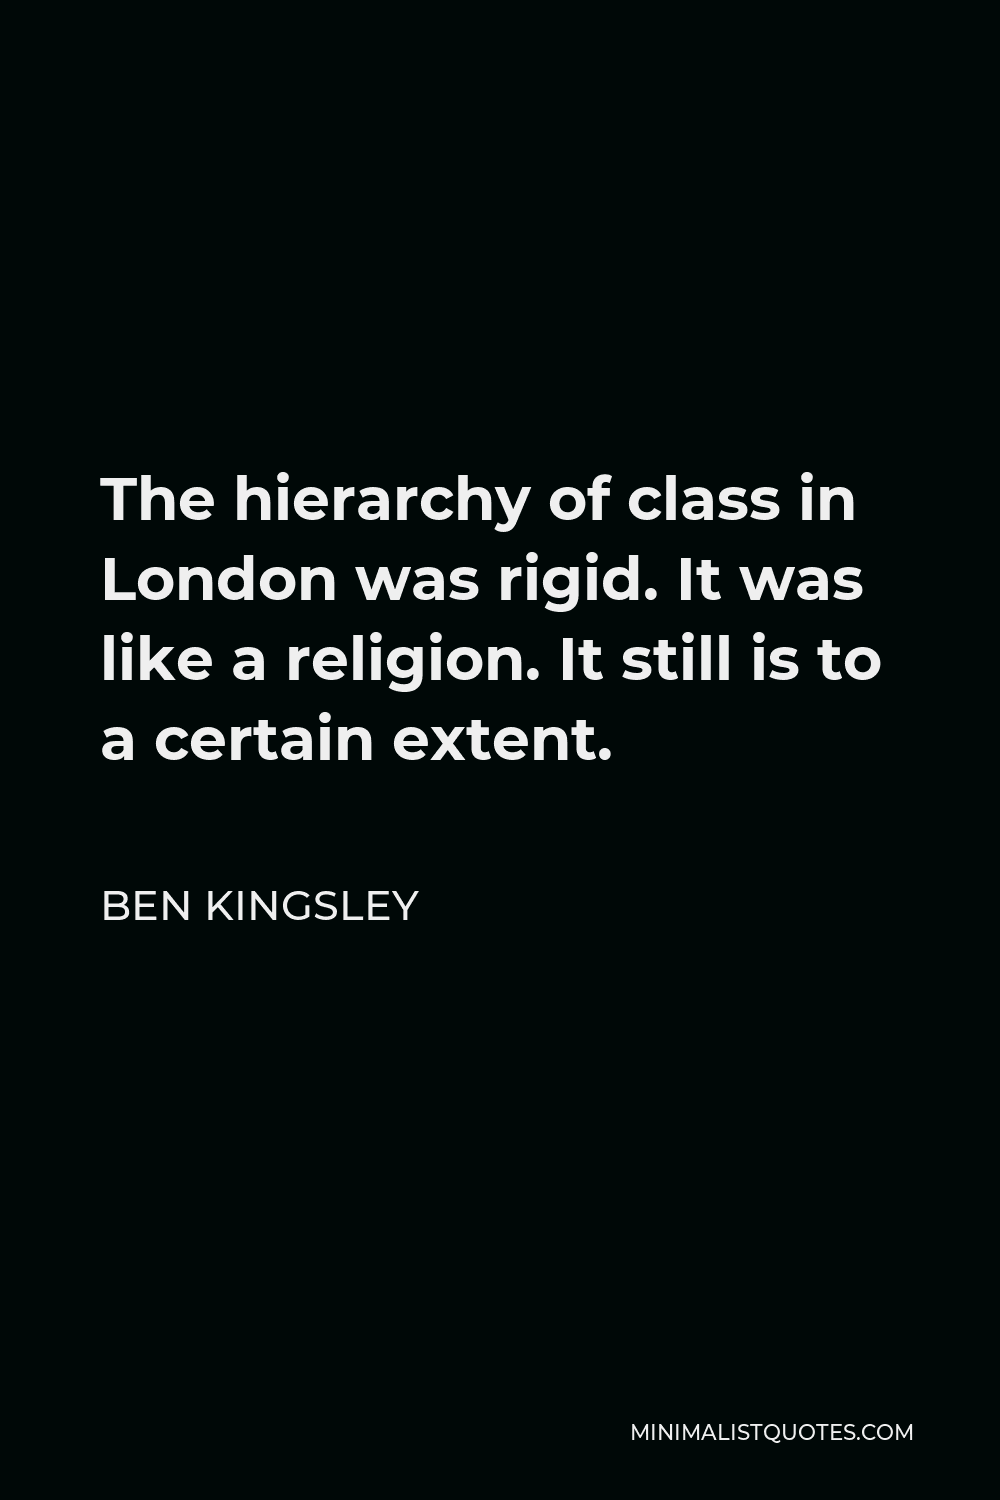 Ben Kingsley Quote - The hierarchy of class in London was rigid. It was like a religion. It still is to a certain extent.